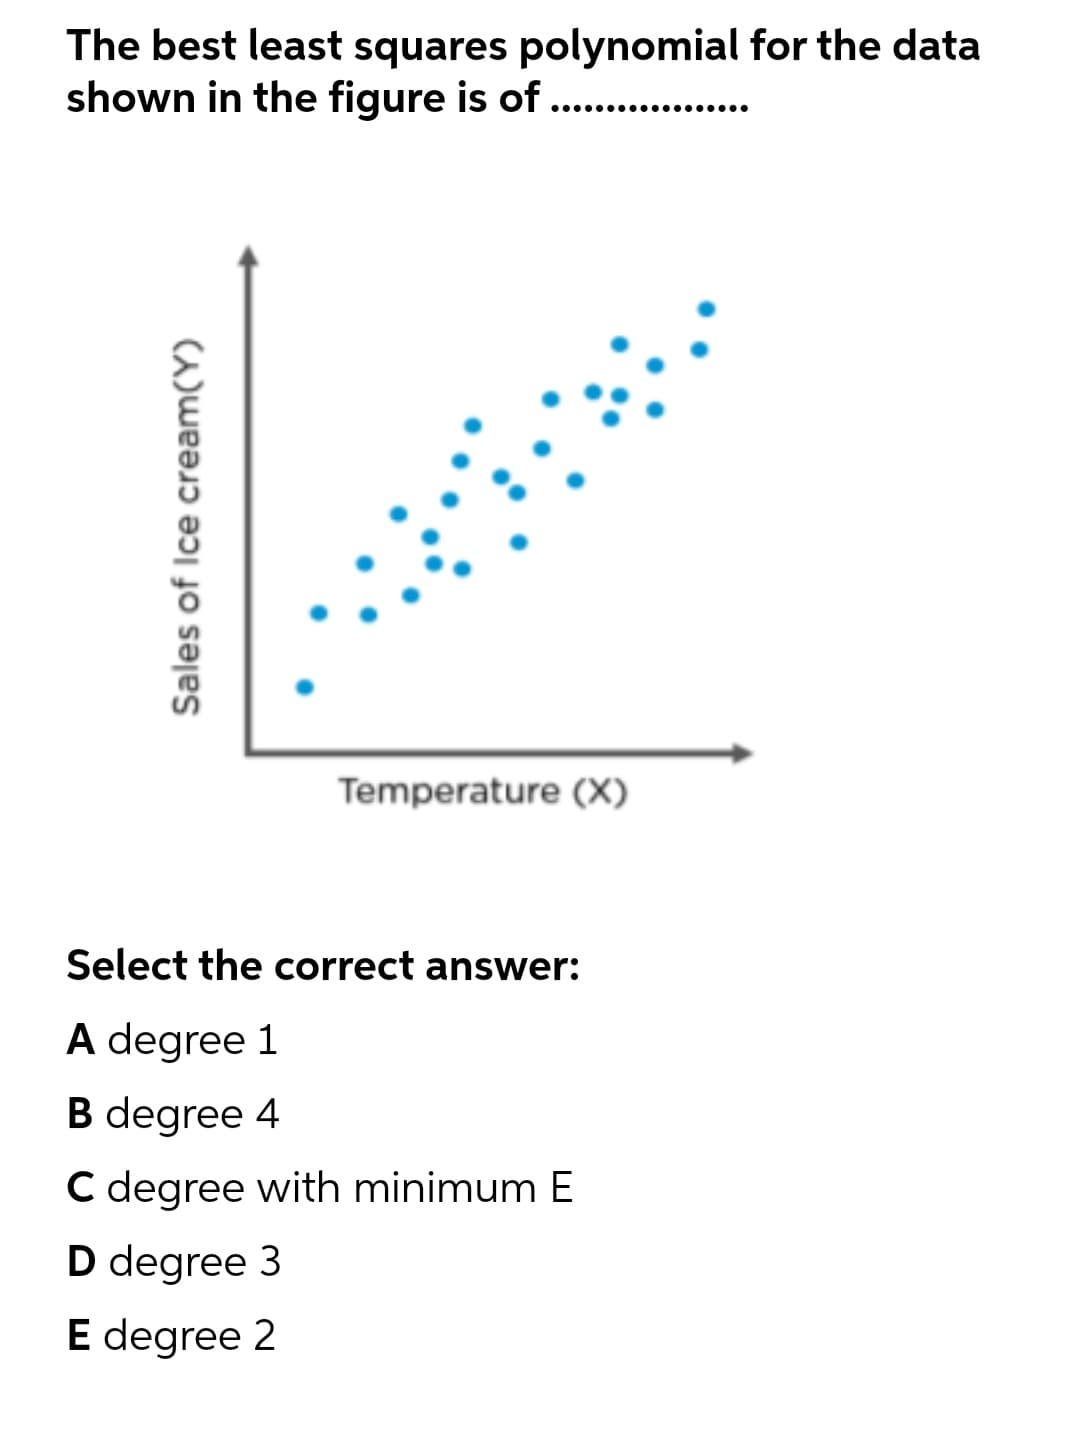 The best least squares polynomial for the data
shown in the figure is of .
.... ..... ..
Temperature (X)
Select the correct answer:
A degree 1
B degree 4
C degree with minimum E
D degree 3
E degree 2
Sales of Ice cream(Y)
